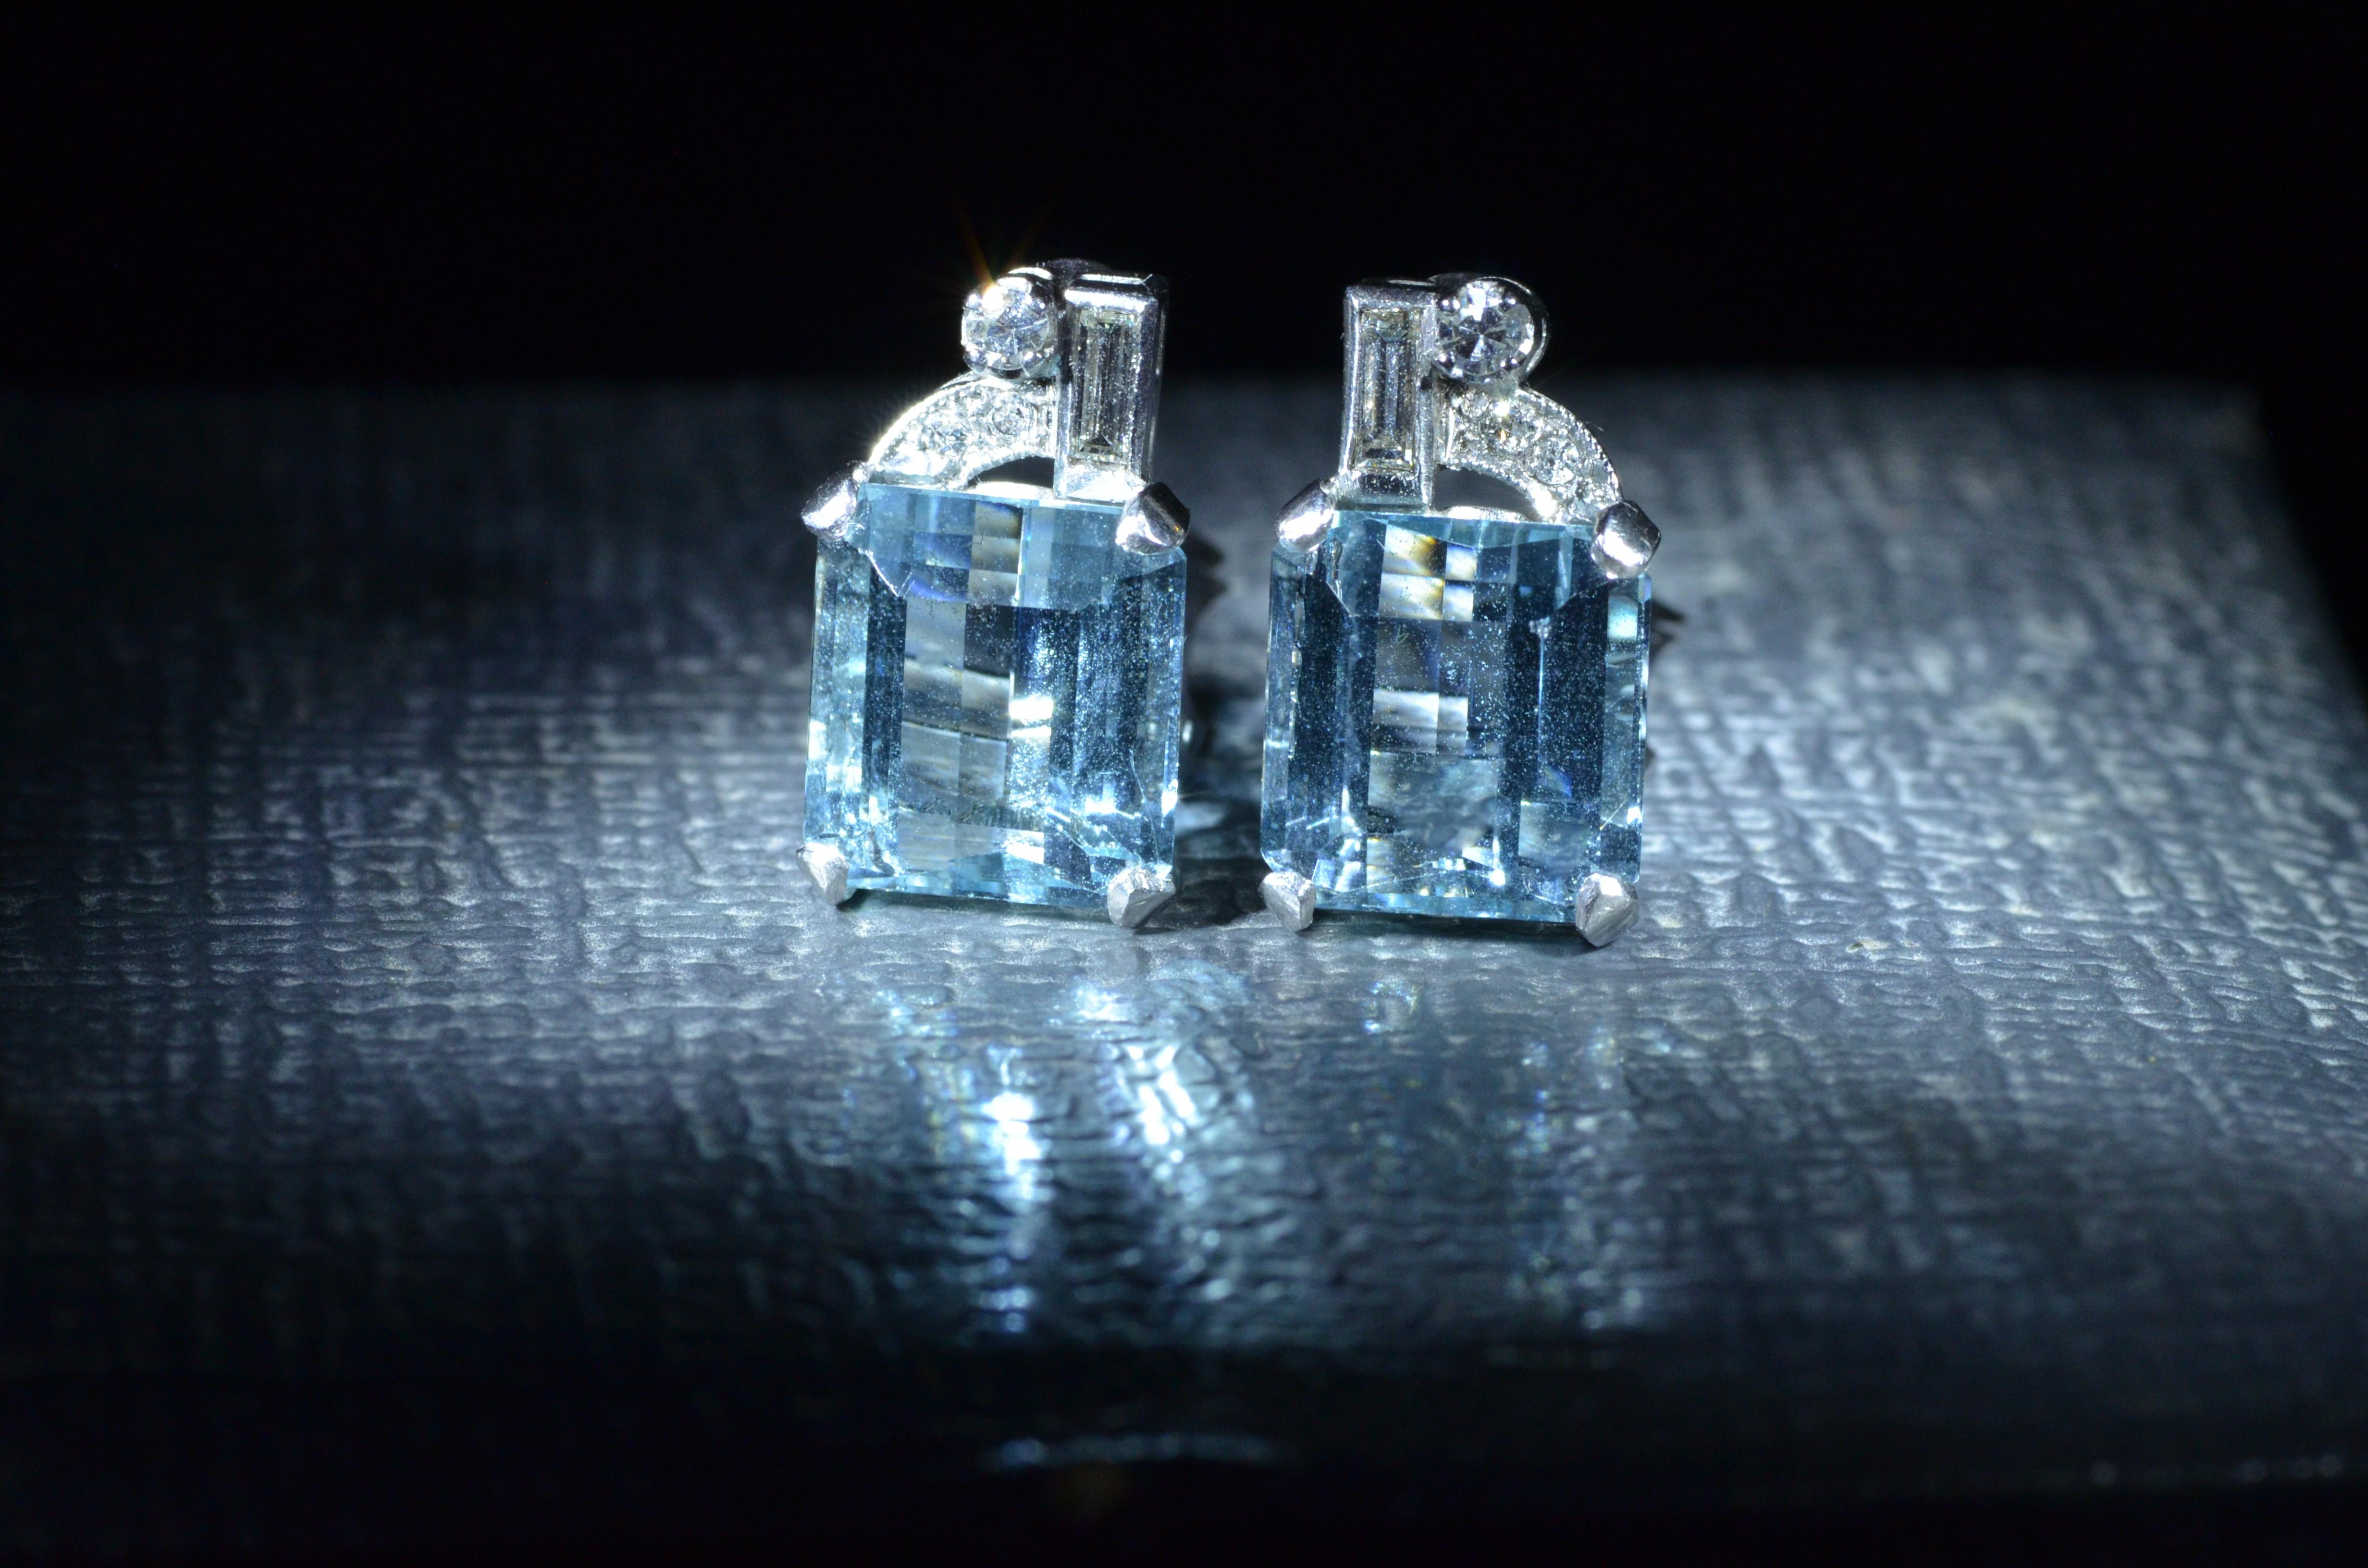 Ladies Platinum Art Deco earrings four (4) prong set with 10 carats of Aquamarine Beryl (5 carats each ear).  The earrings are also set with baguette cut and single cut diamonds for a total diamond weight by measurement of 0.30 carats.  The earrings